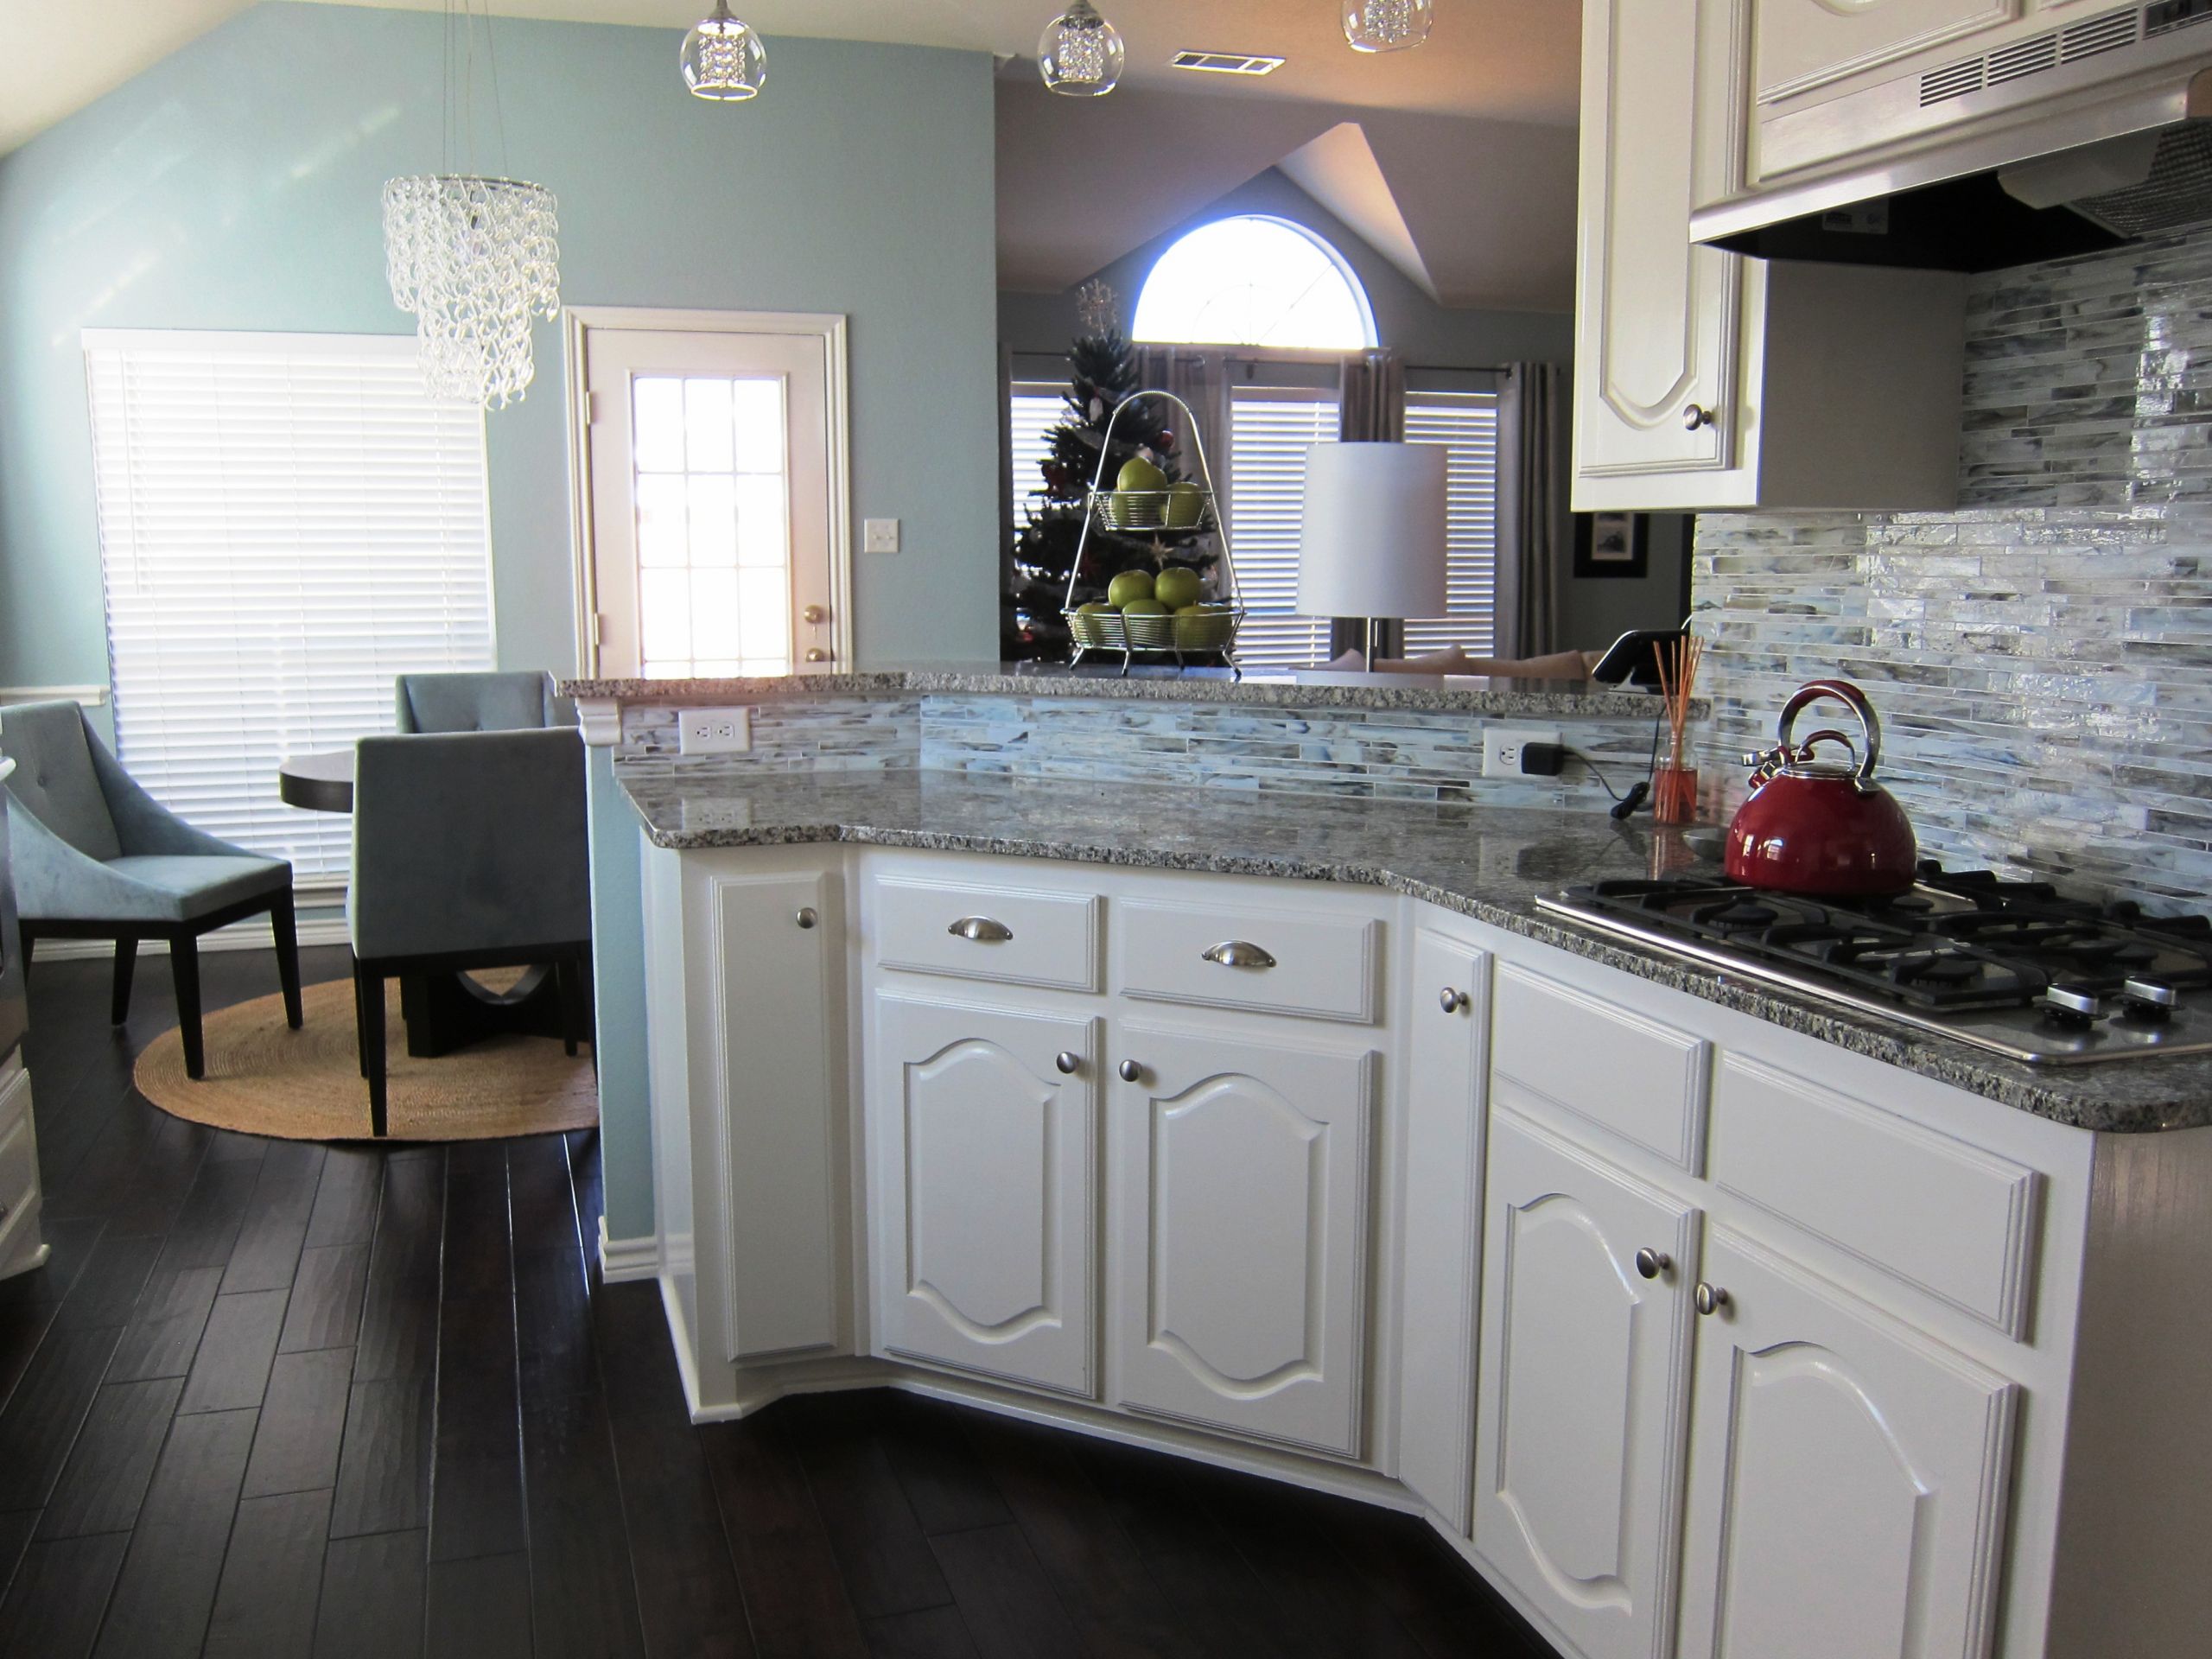 Kitchen And Bath Remodeling Contractors
 The Floor Barn is DFW s 1 Kitchen Remodeling Contractor